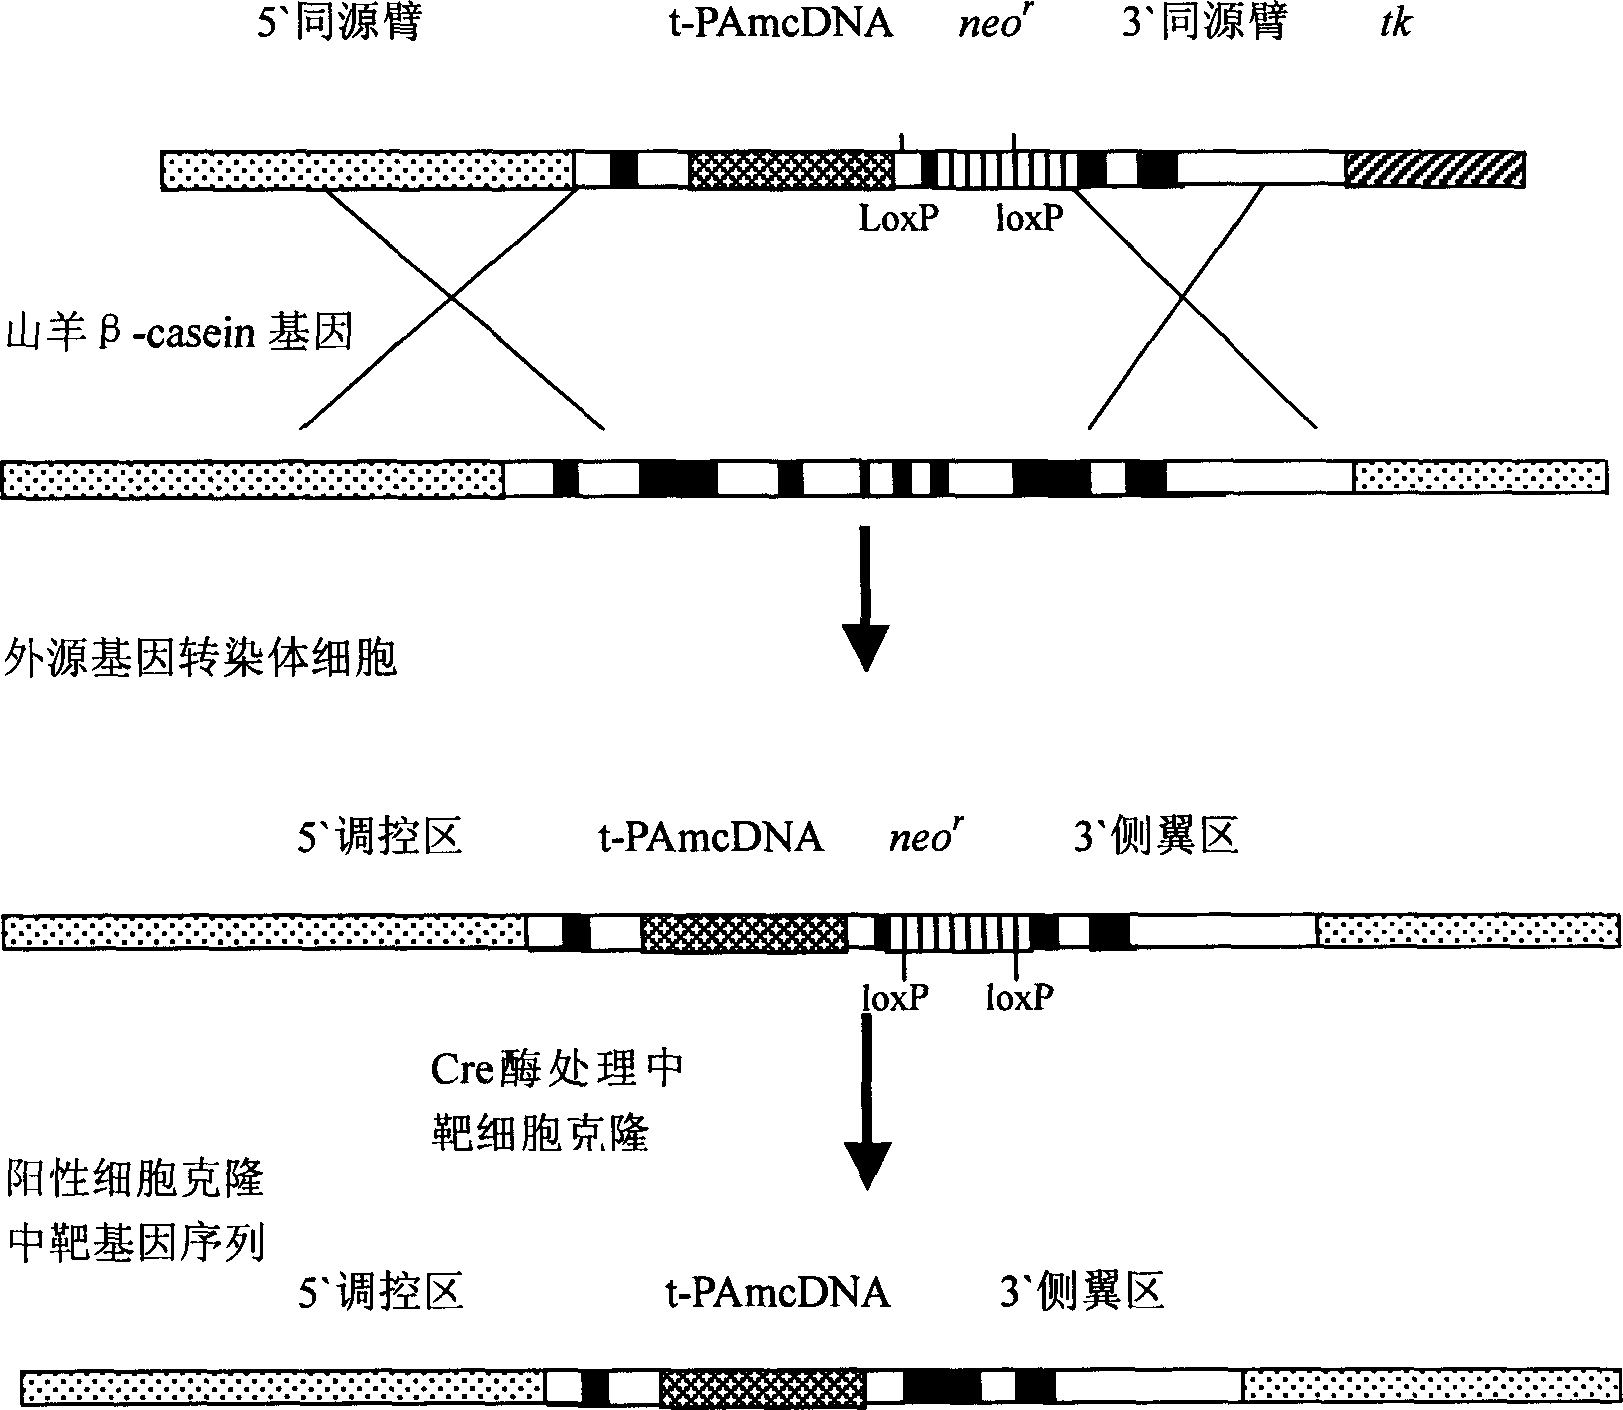 Method for preparing and producing tissue type activator of plasminogen from mutant of transgene goat by nuclear transplantation